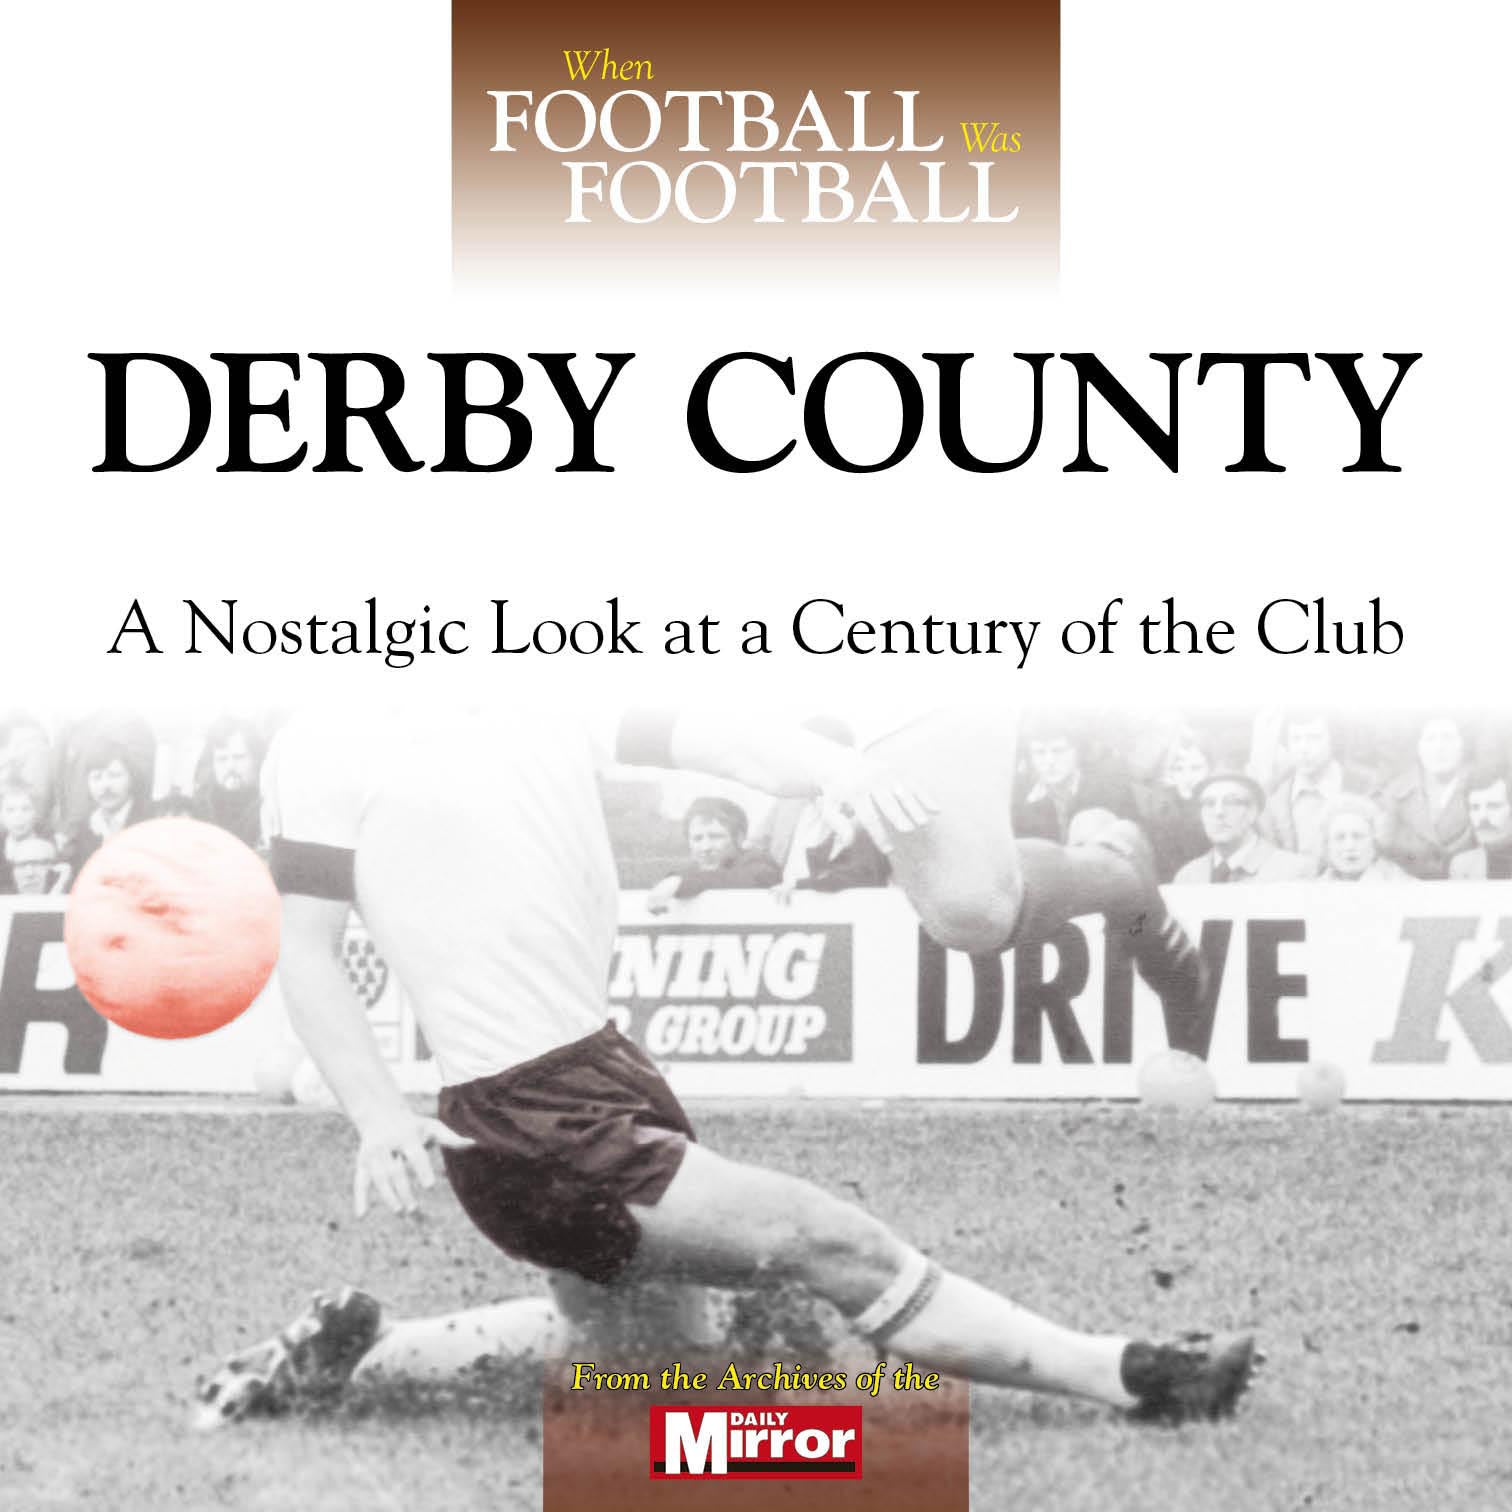 When Football Was Football – Derby County – A Nostalgic Look at a Century of the Club